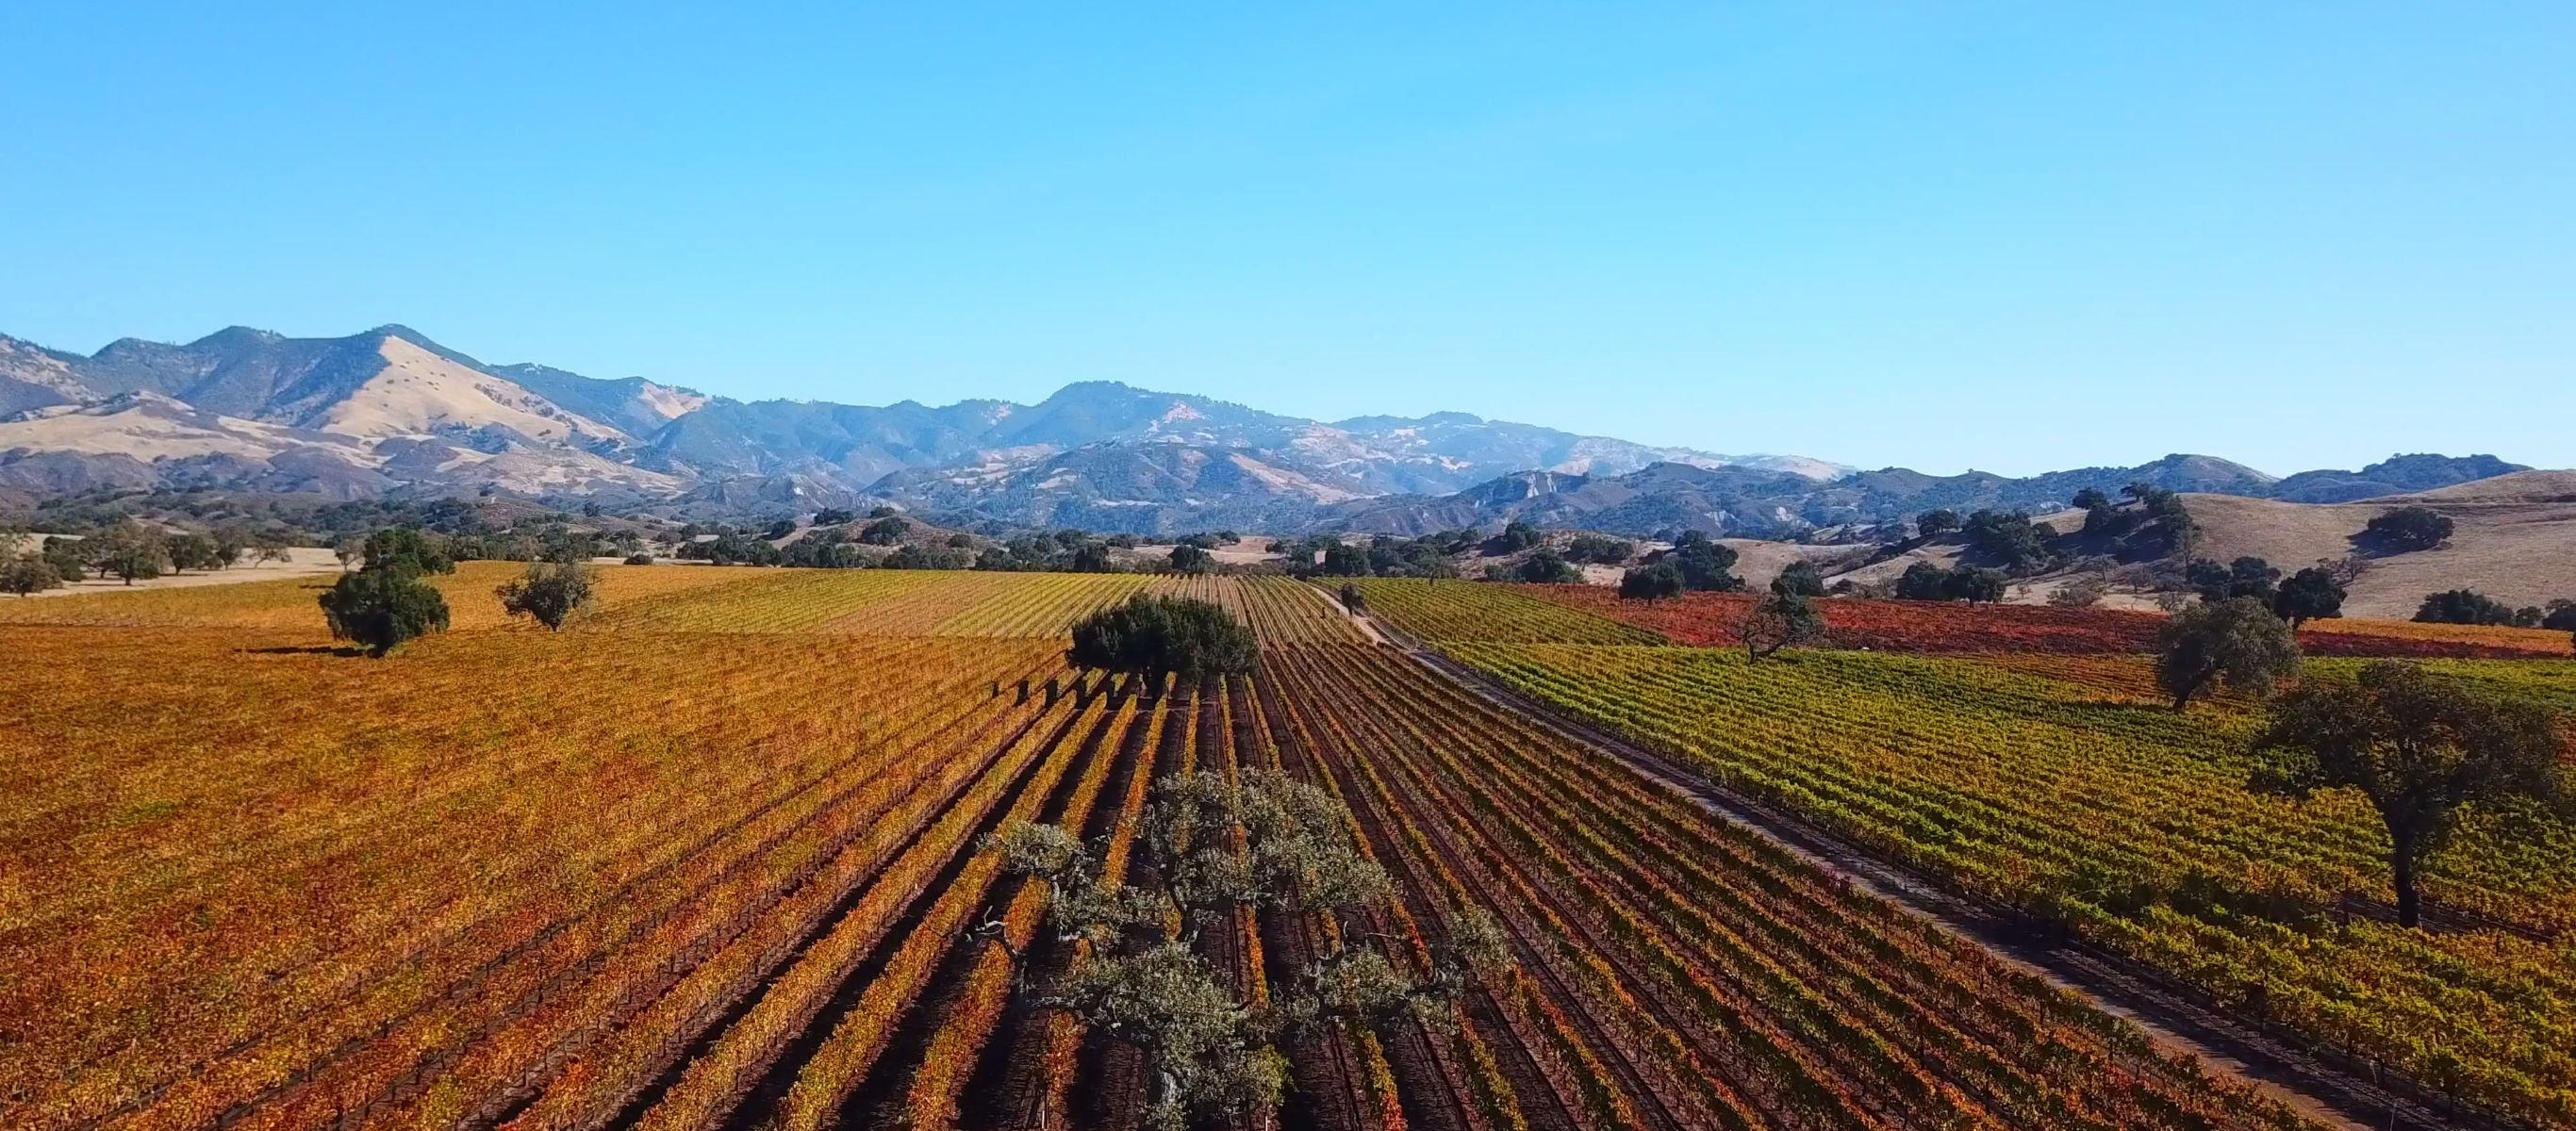 Rodney's Vineyard at the Fess Parker home ranch with Wine & Spirits Top 100 Winery of 2022.